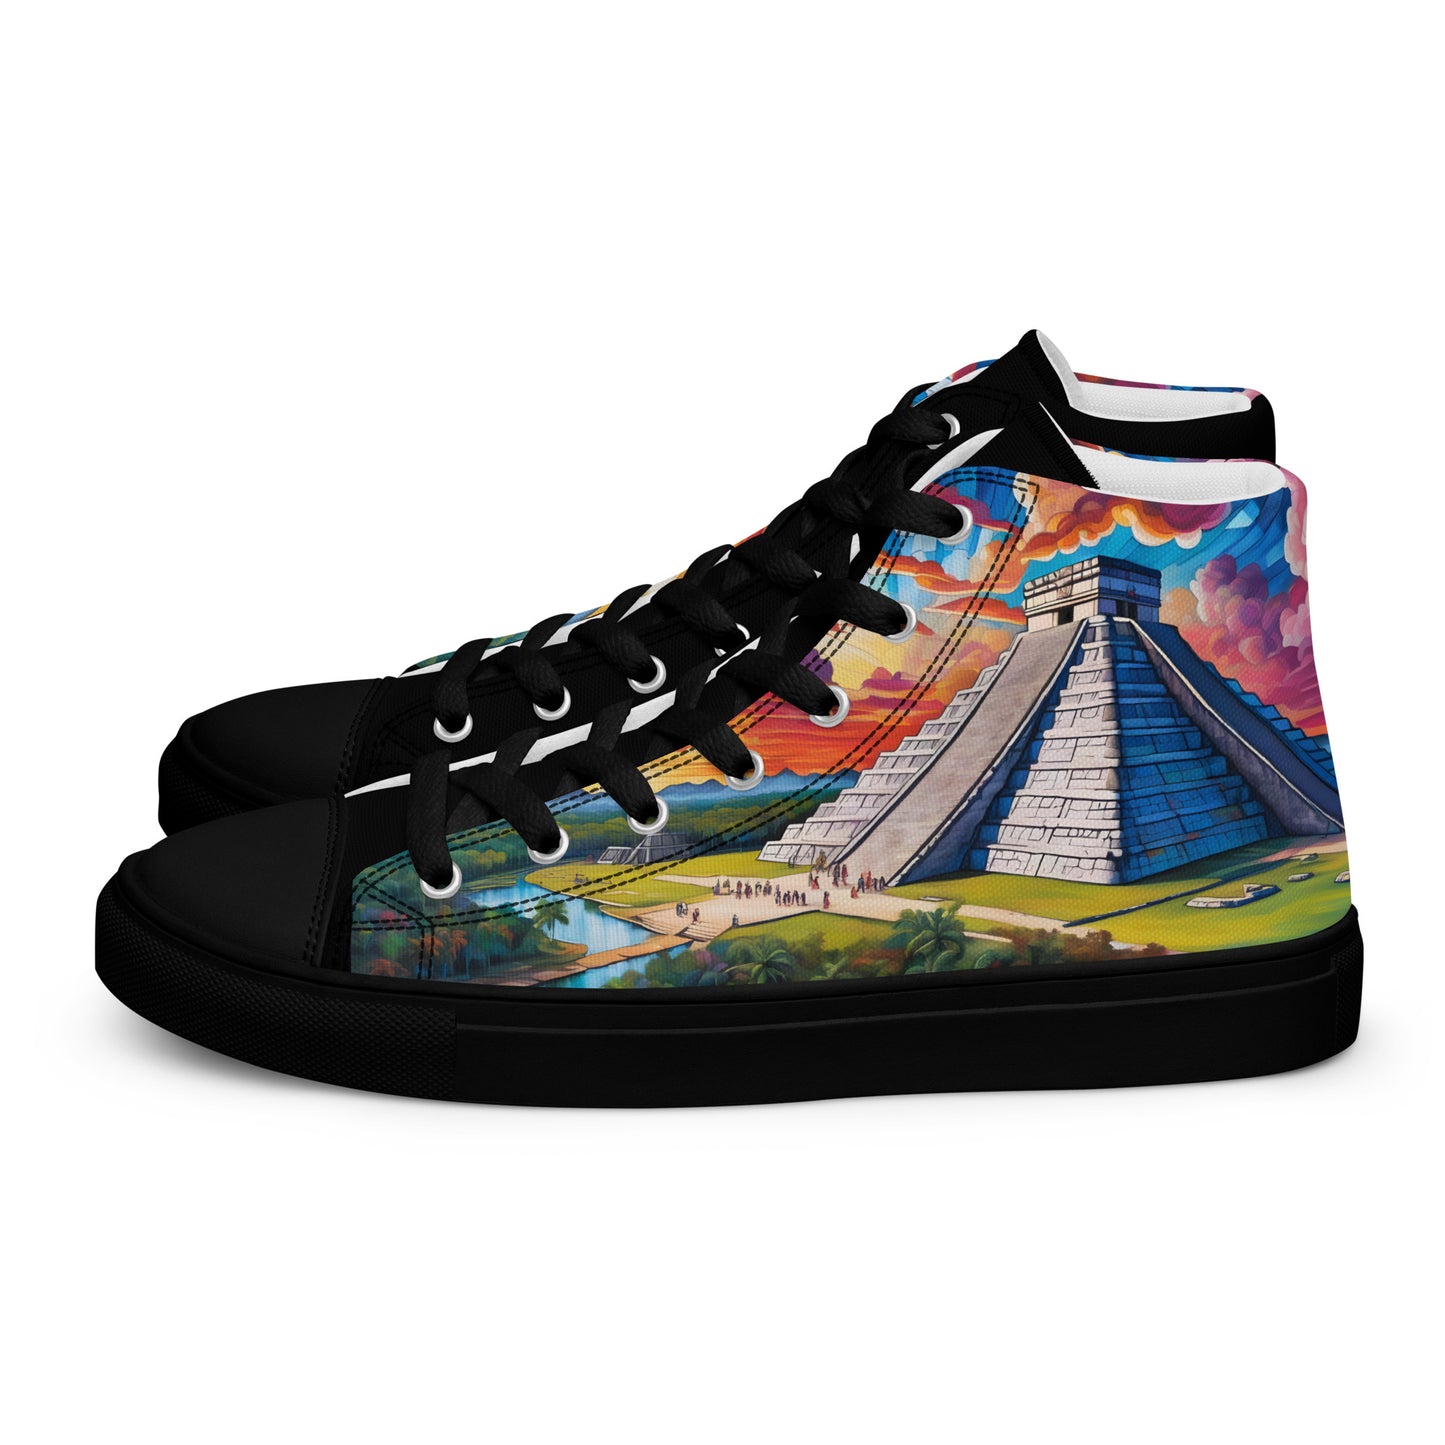 Chichén Itzá - Stained glass - Men - Black - High top shoes